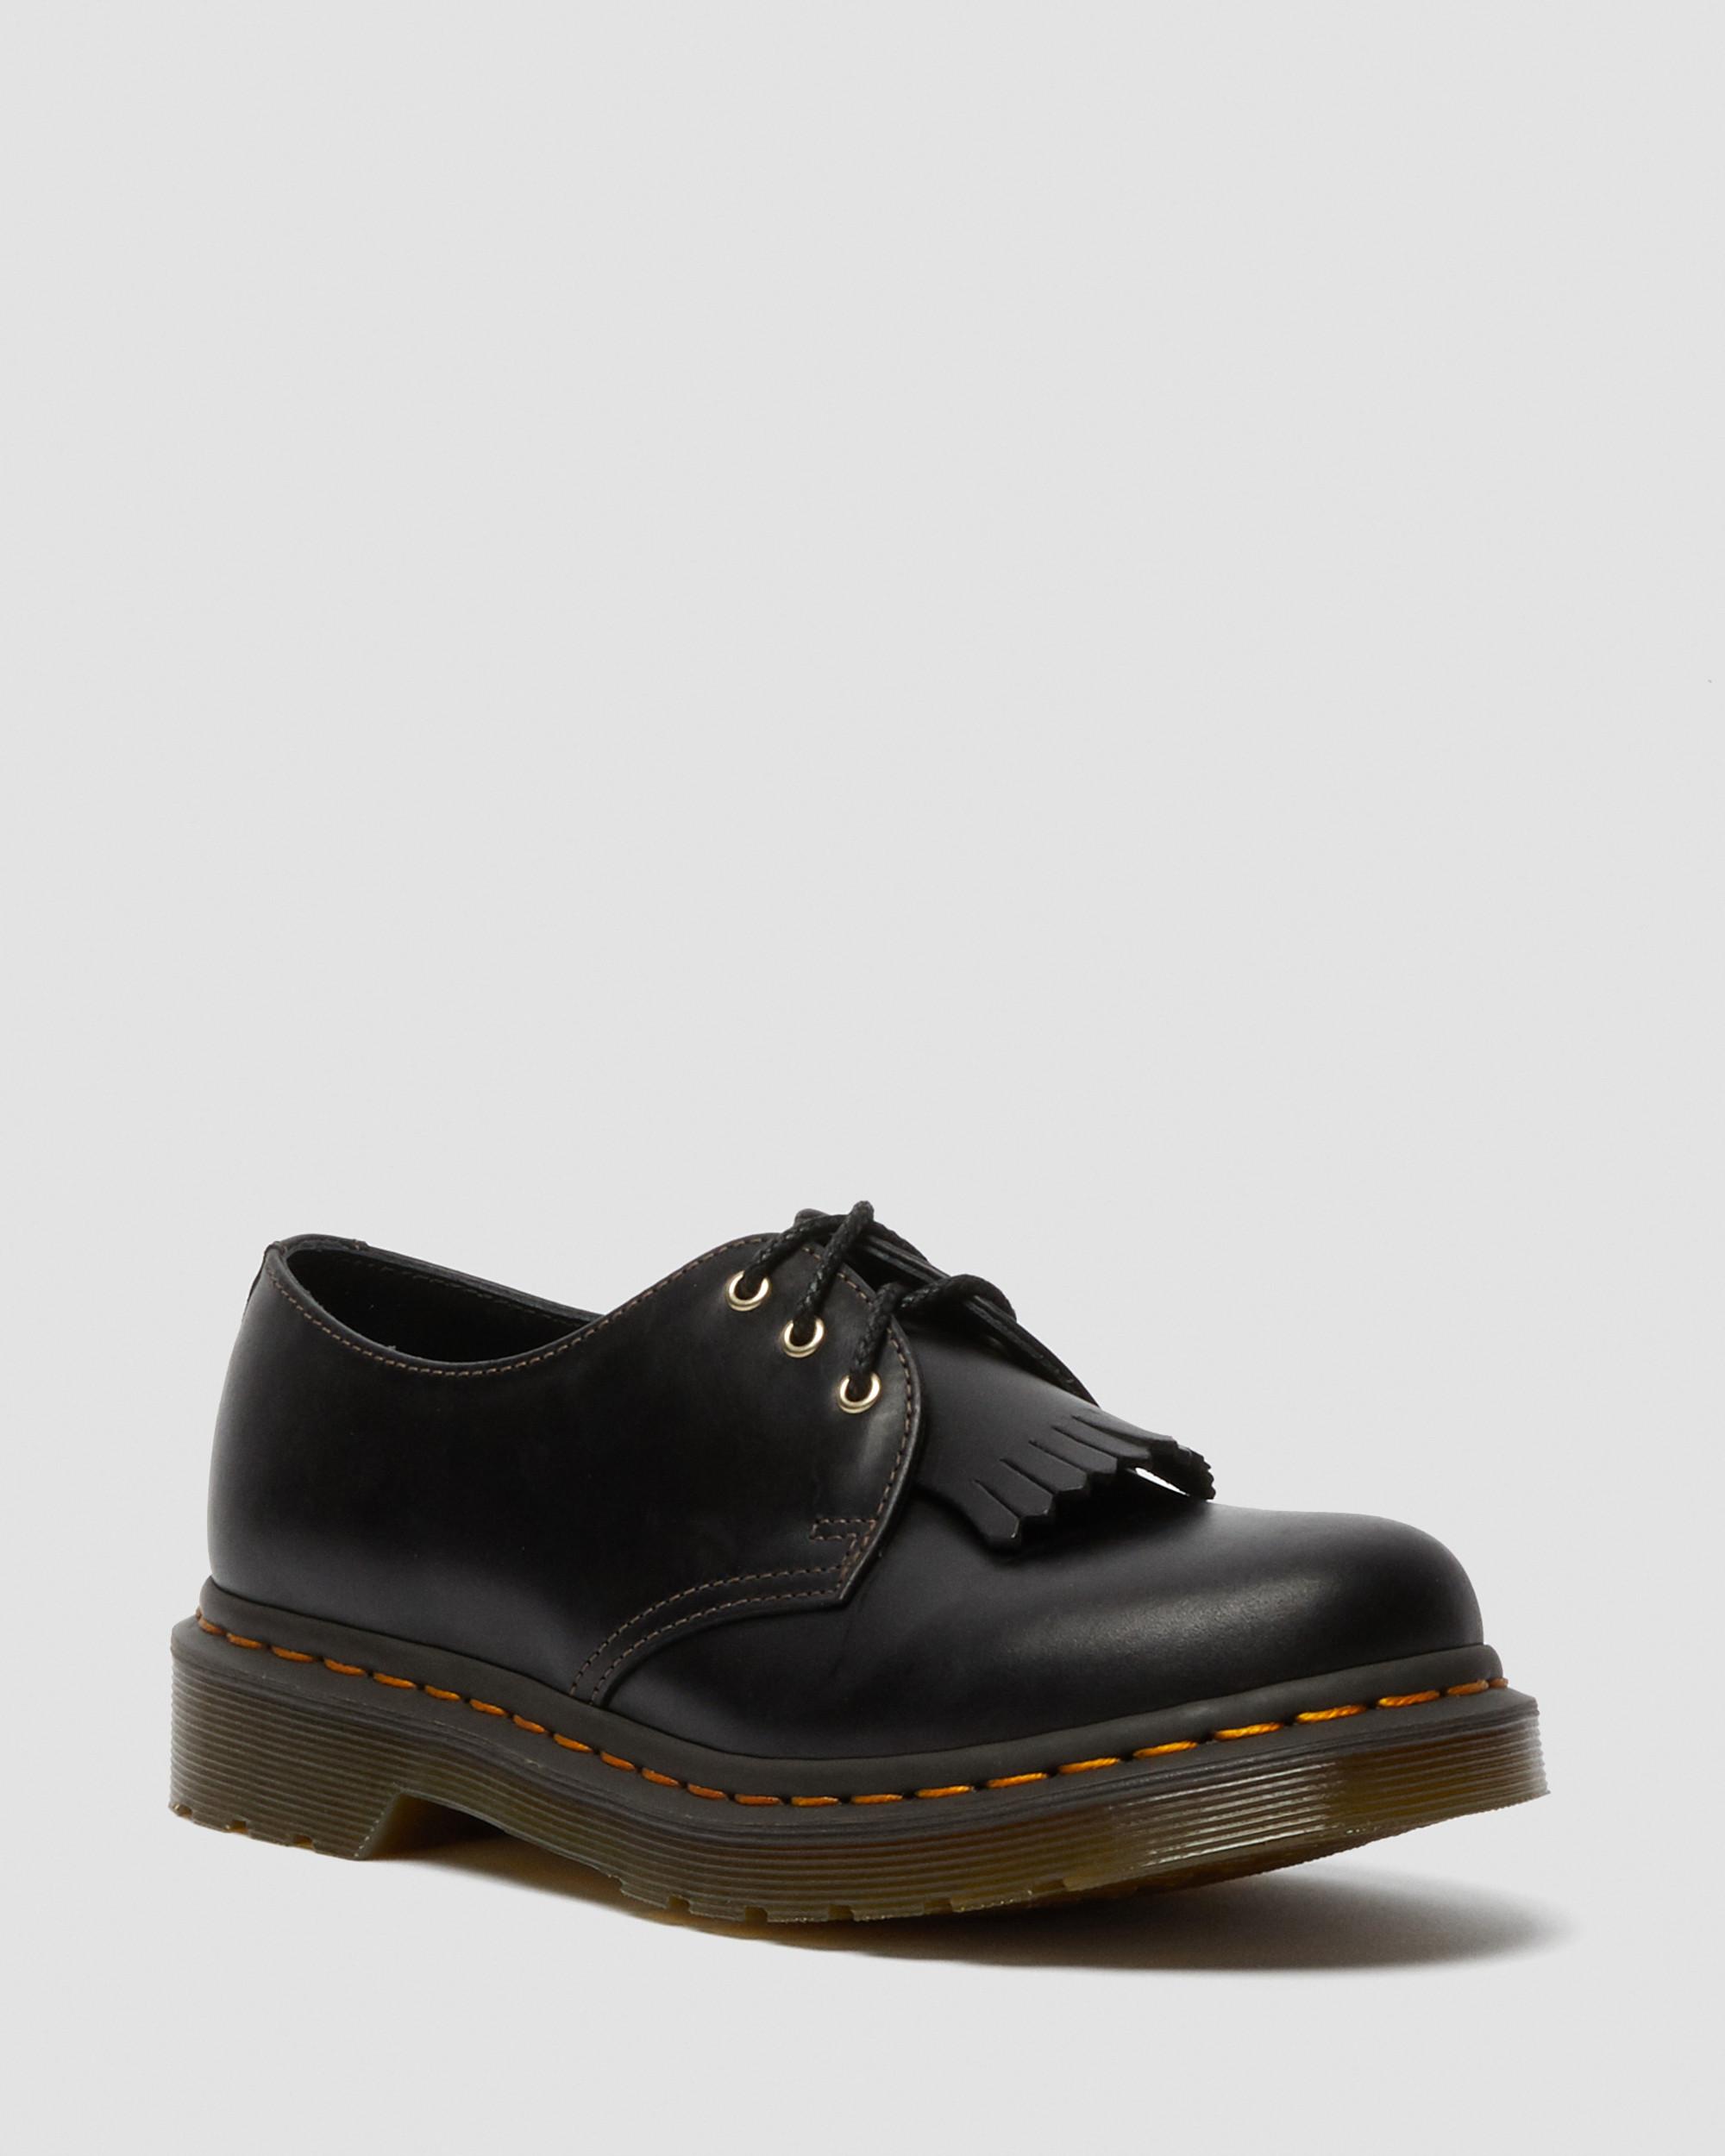 1461 Women's Abruzzo Leather Oxford Shoes in Black | Dr. Martens